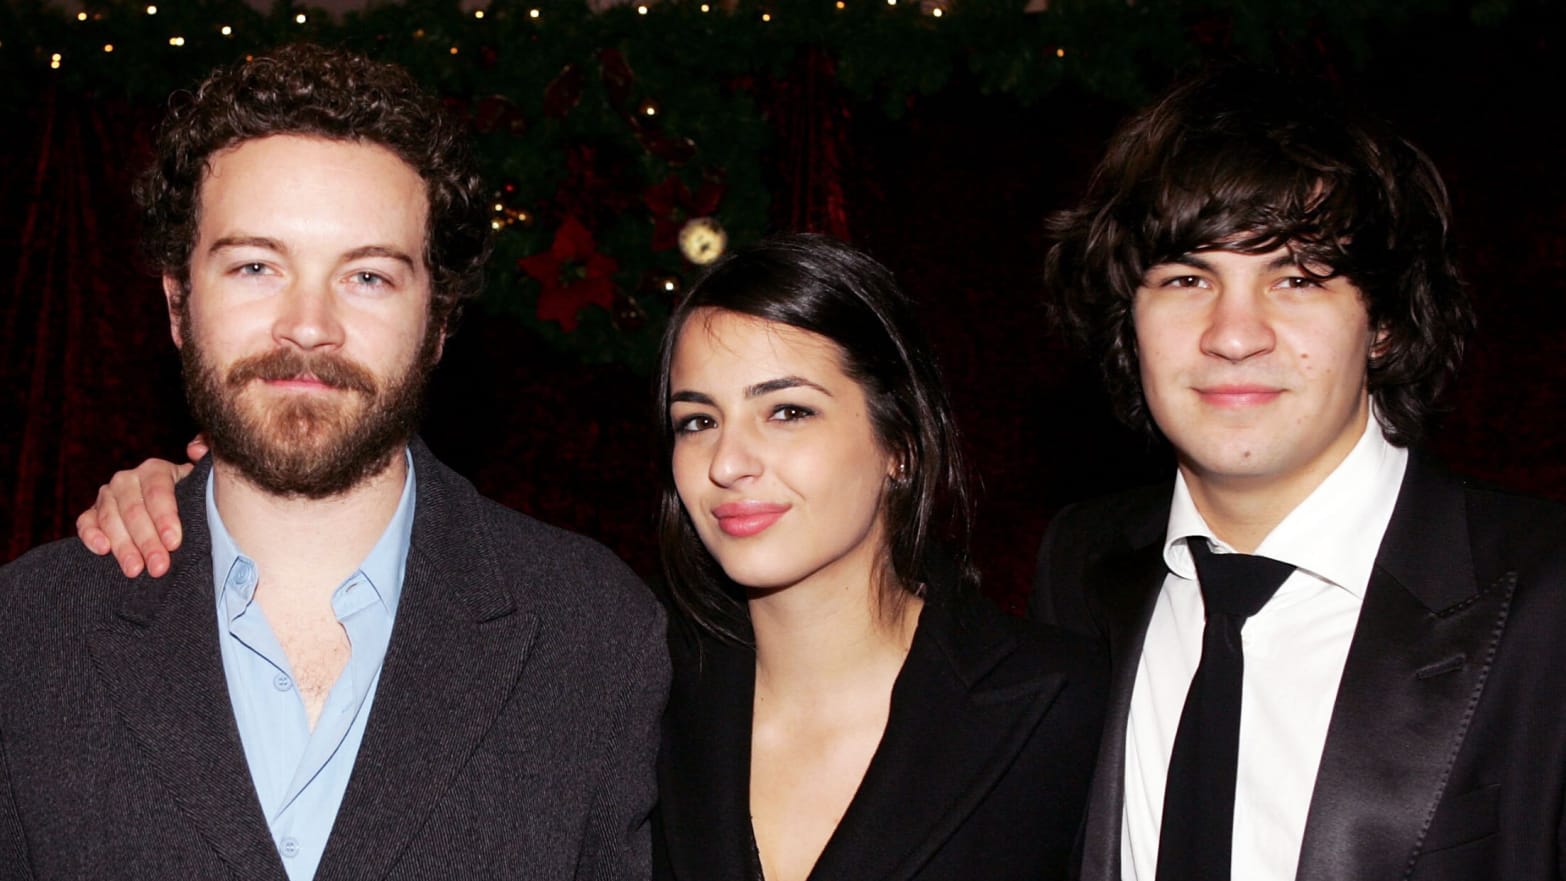 Danny Mastersons Ex-Stepdad Joe Reaiche Says His Kids Jordan and Alanna Masterson Lied to Help Actor picture picture